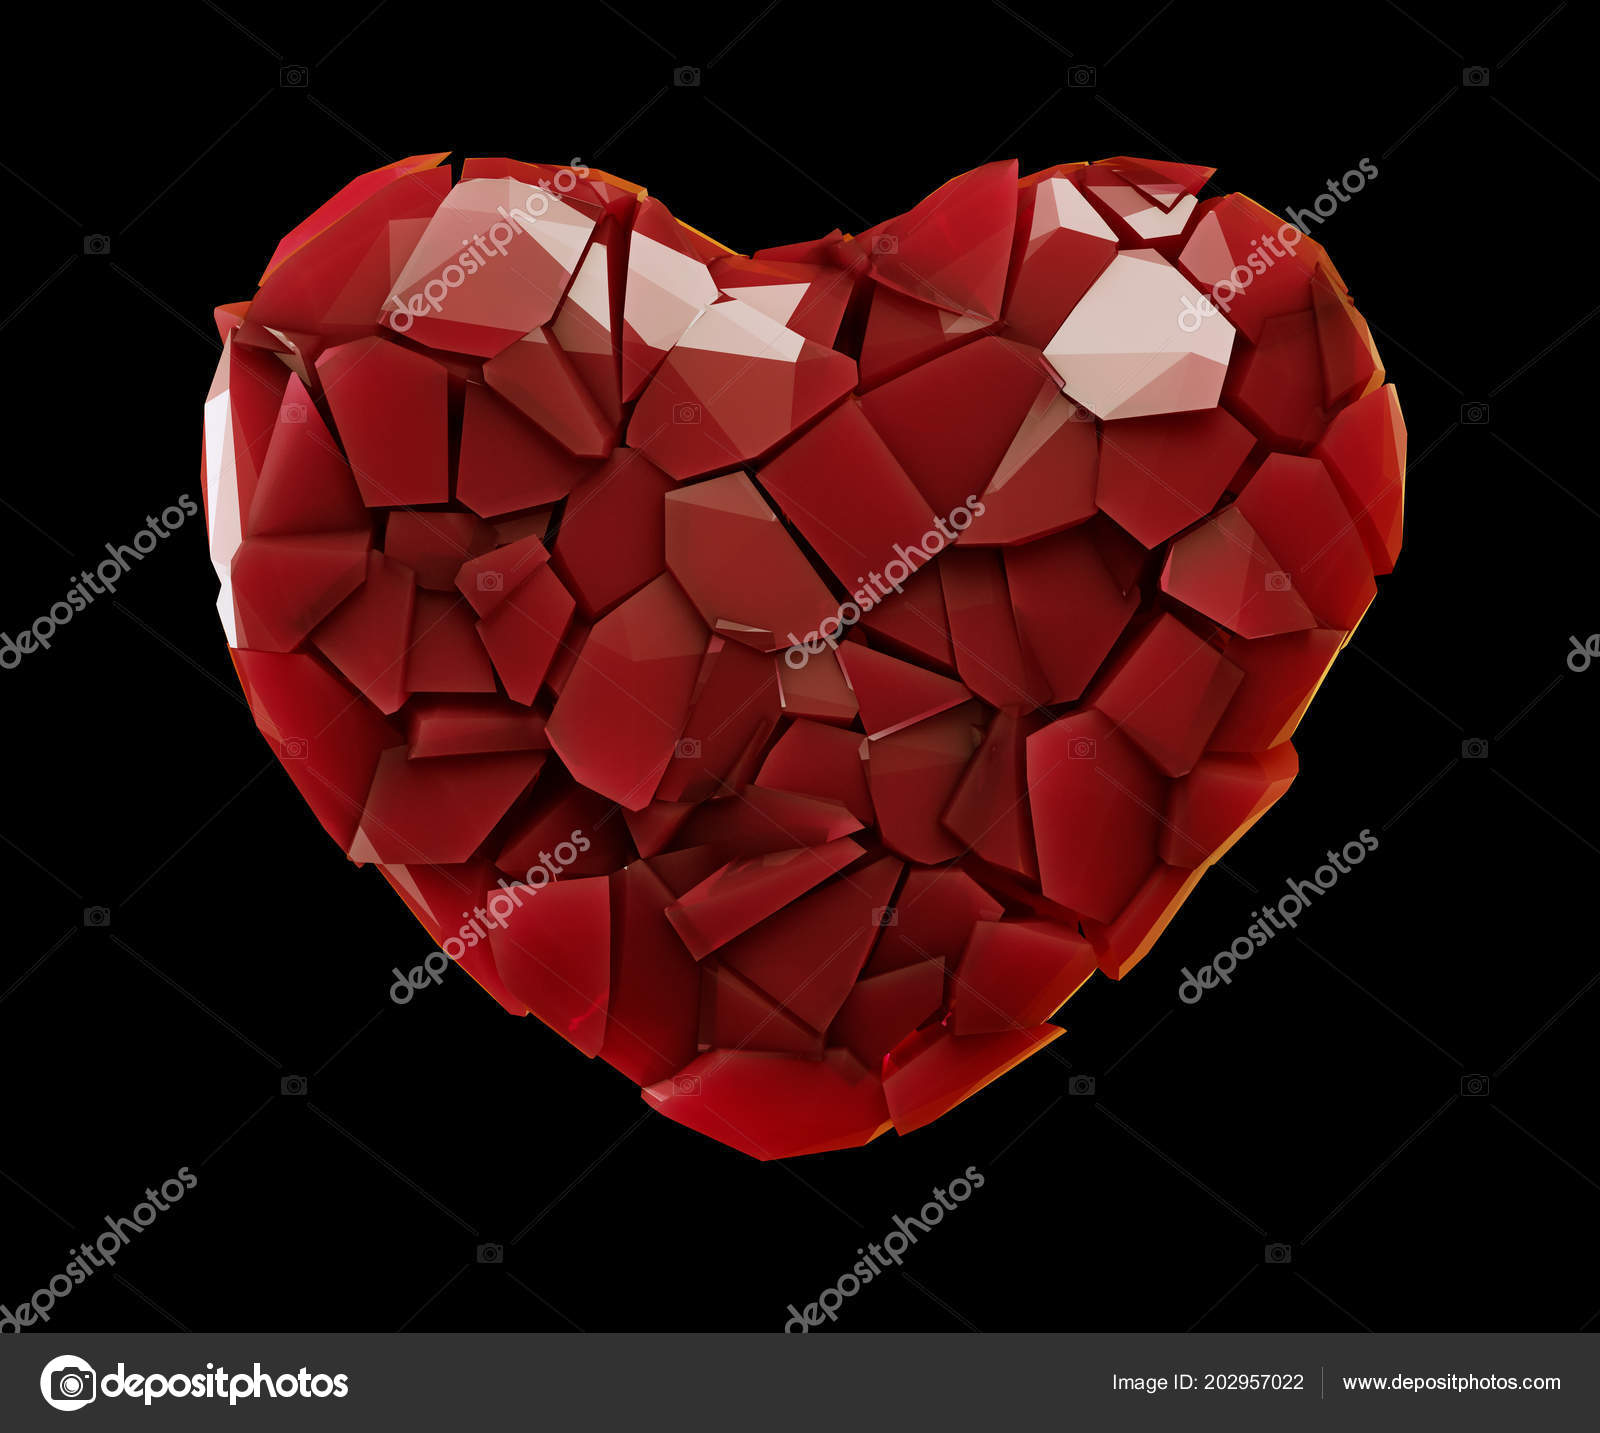 Heart Made Of Plastic Shards Red Color Isolated On Black Background